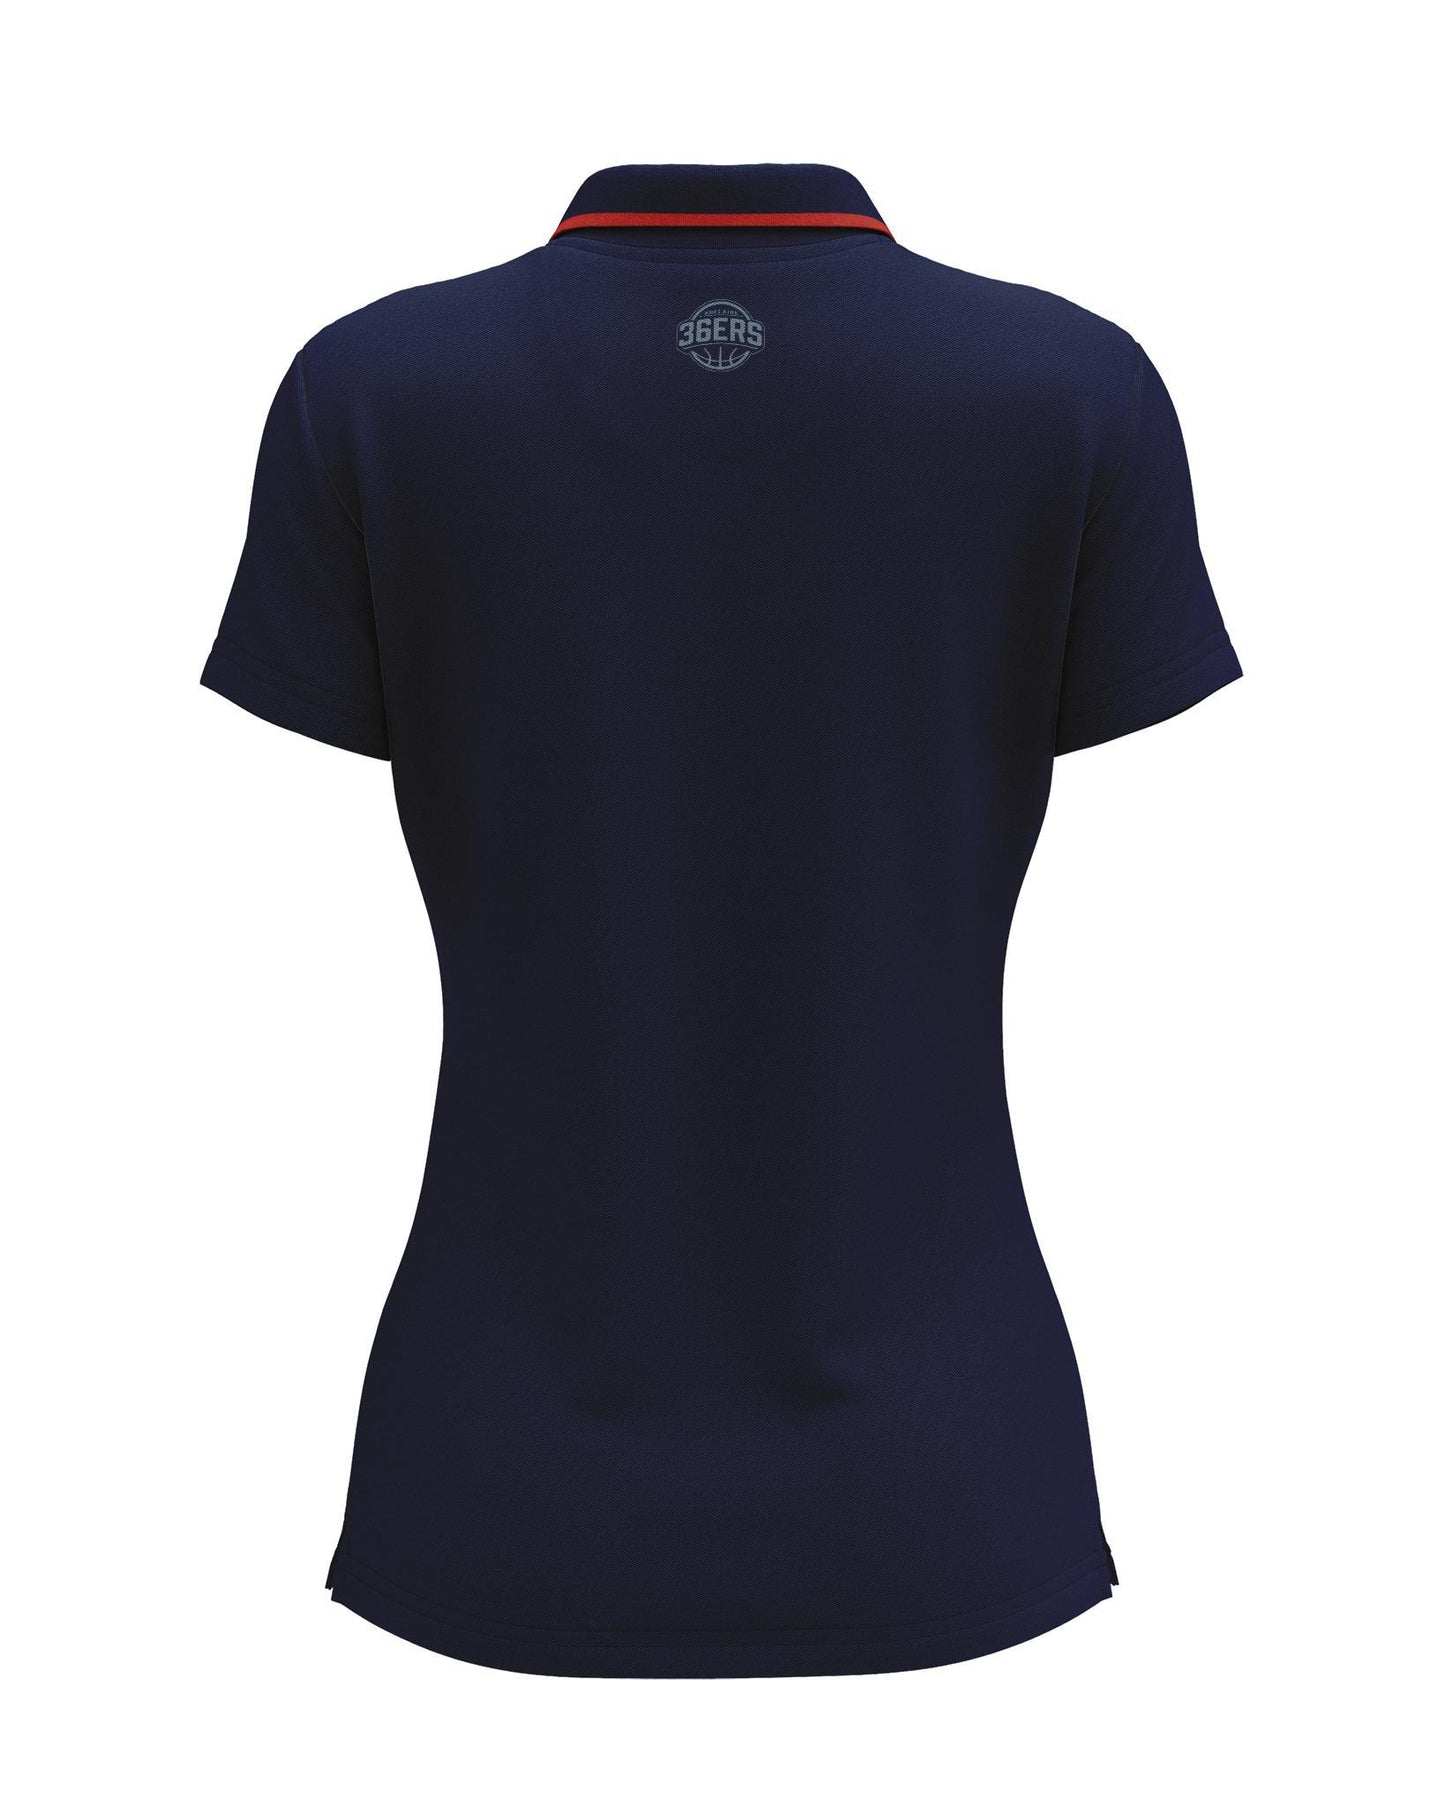 NBL24 Womens Sublimated Player Polo